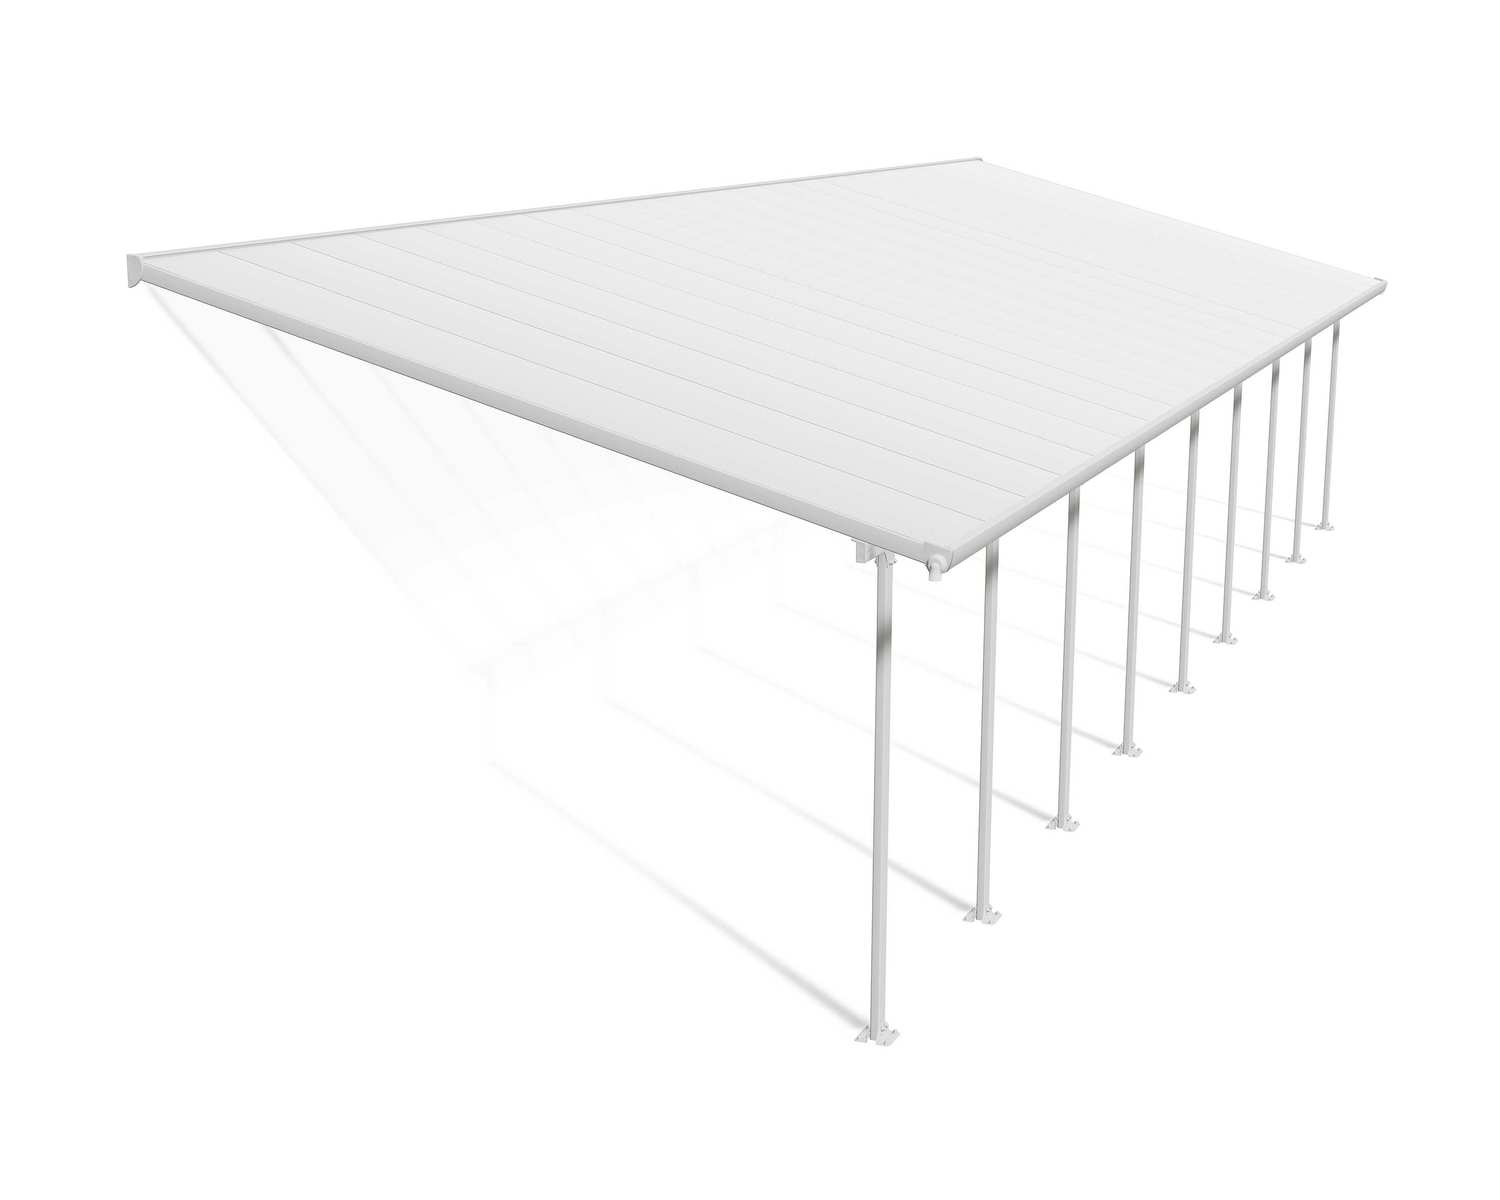 Patio Cover Kit Feria 4 ft. x 12.75 ft. White Structure &amp; White Multi Wall Glazing